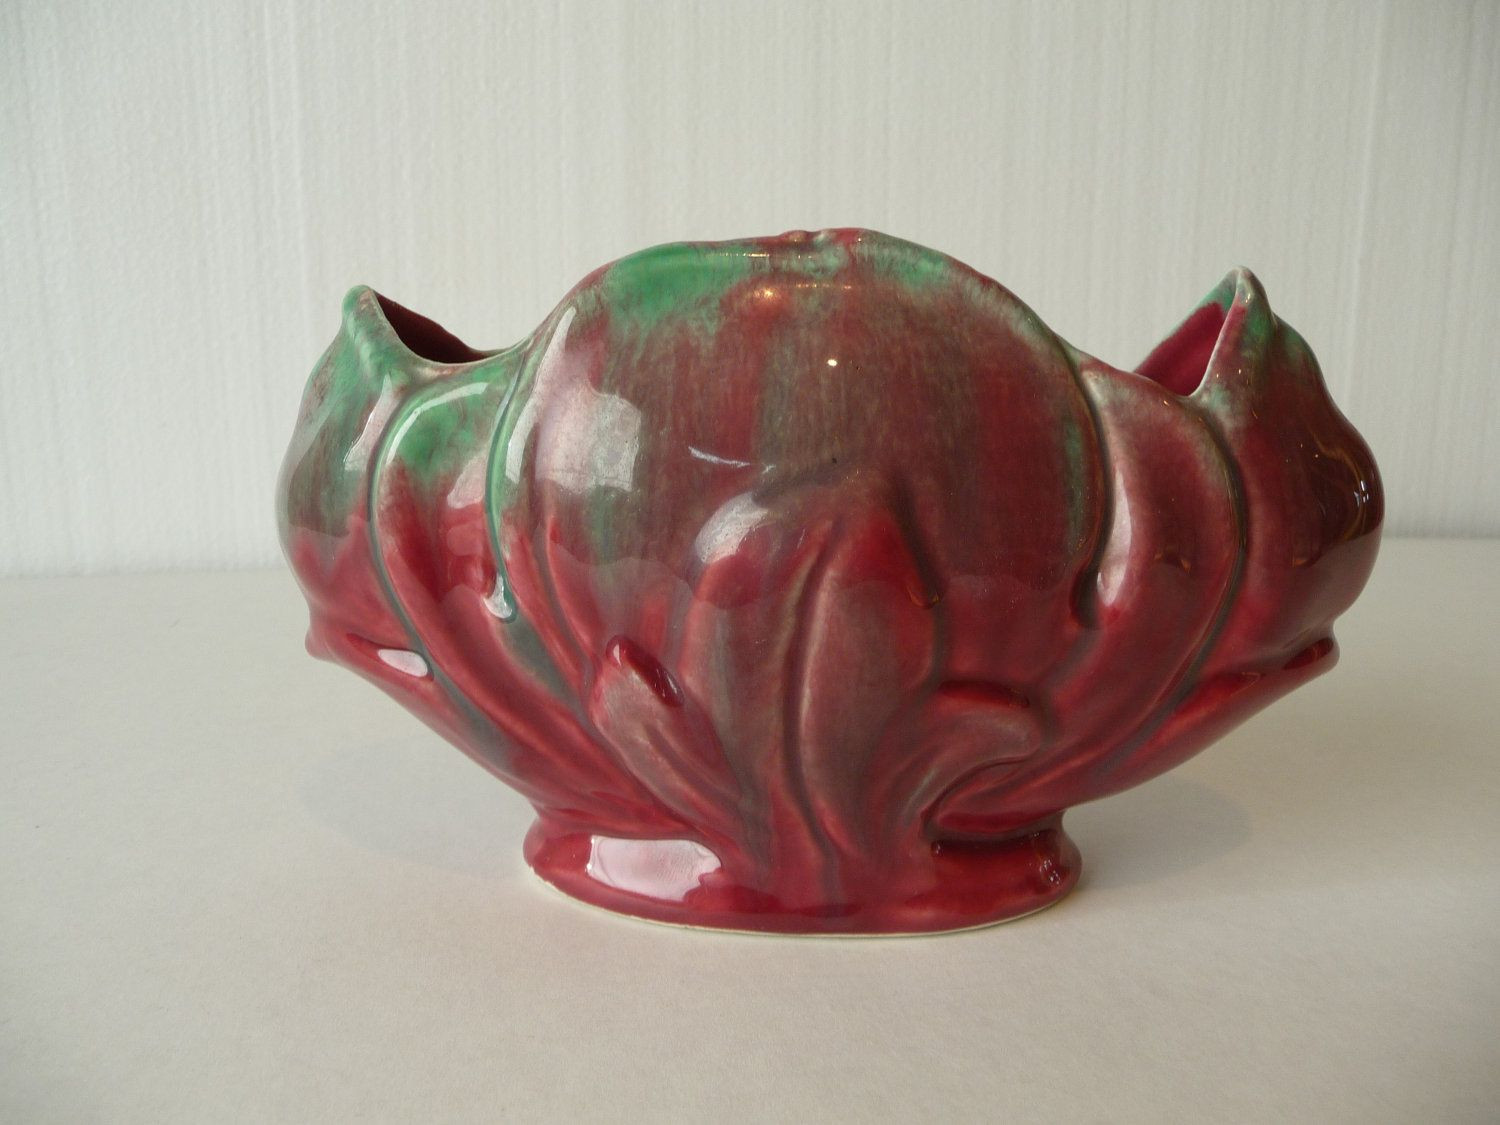 24 Fabulous Hall Pottery Vase 2024 free download hall pottery vase of real mccoy lovely either way mc coy pinterest mccoy regarding vintage mccoy pottery vase planter in pink and green